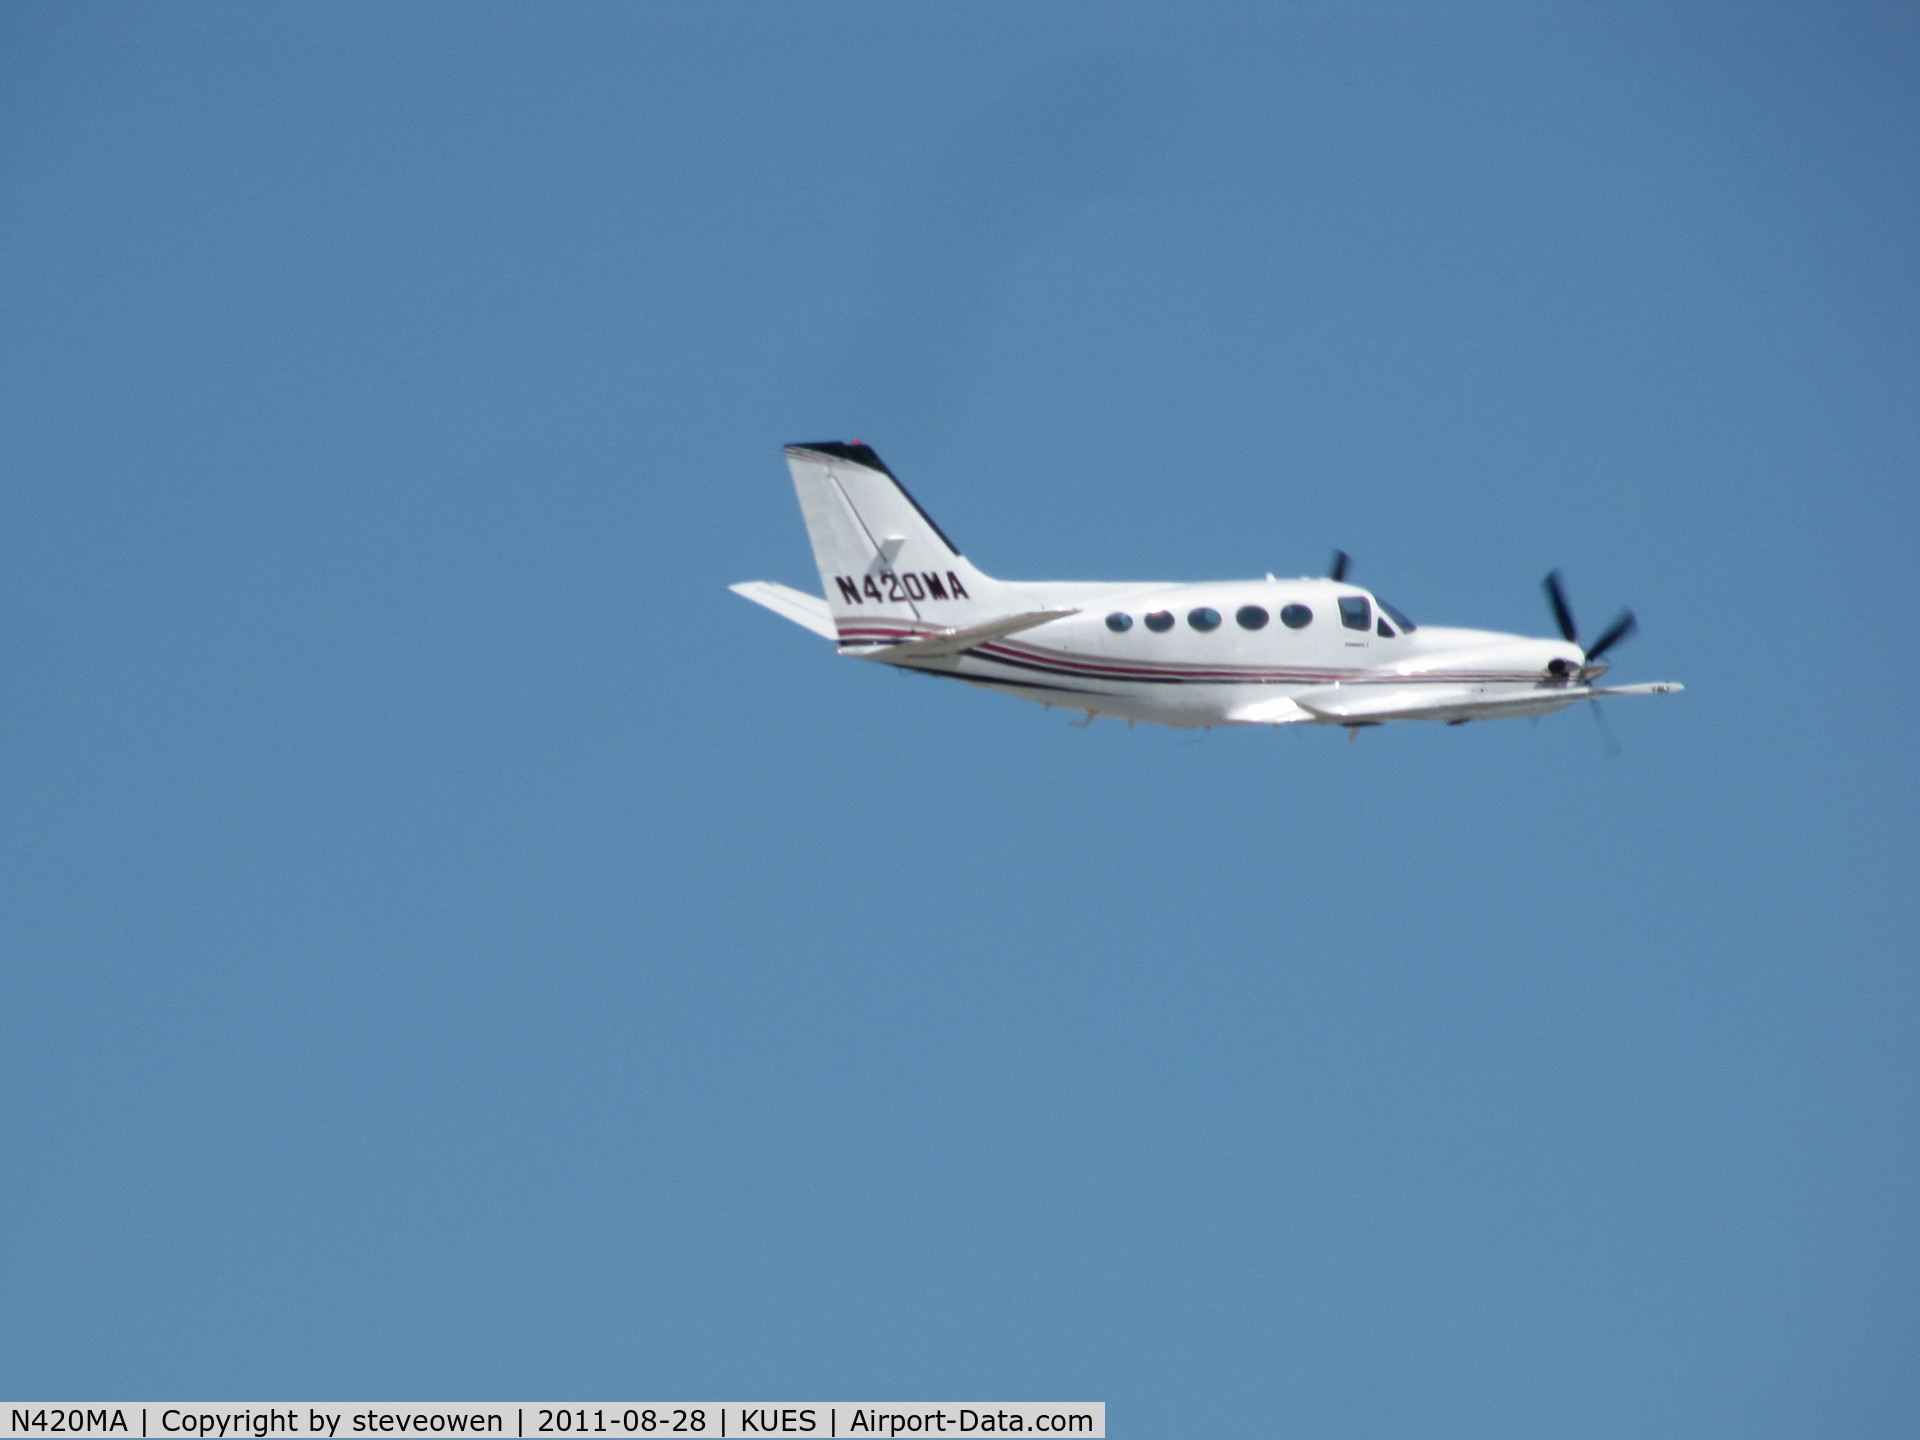 N420MA, 1981 Cessna 425 C/N 425-0116, climbing out of KUES Wings over Waukesha Airshow 2011